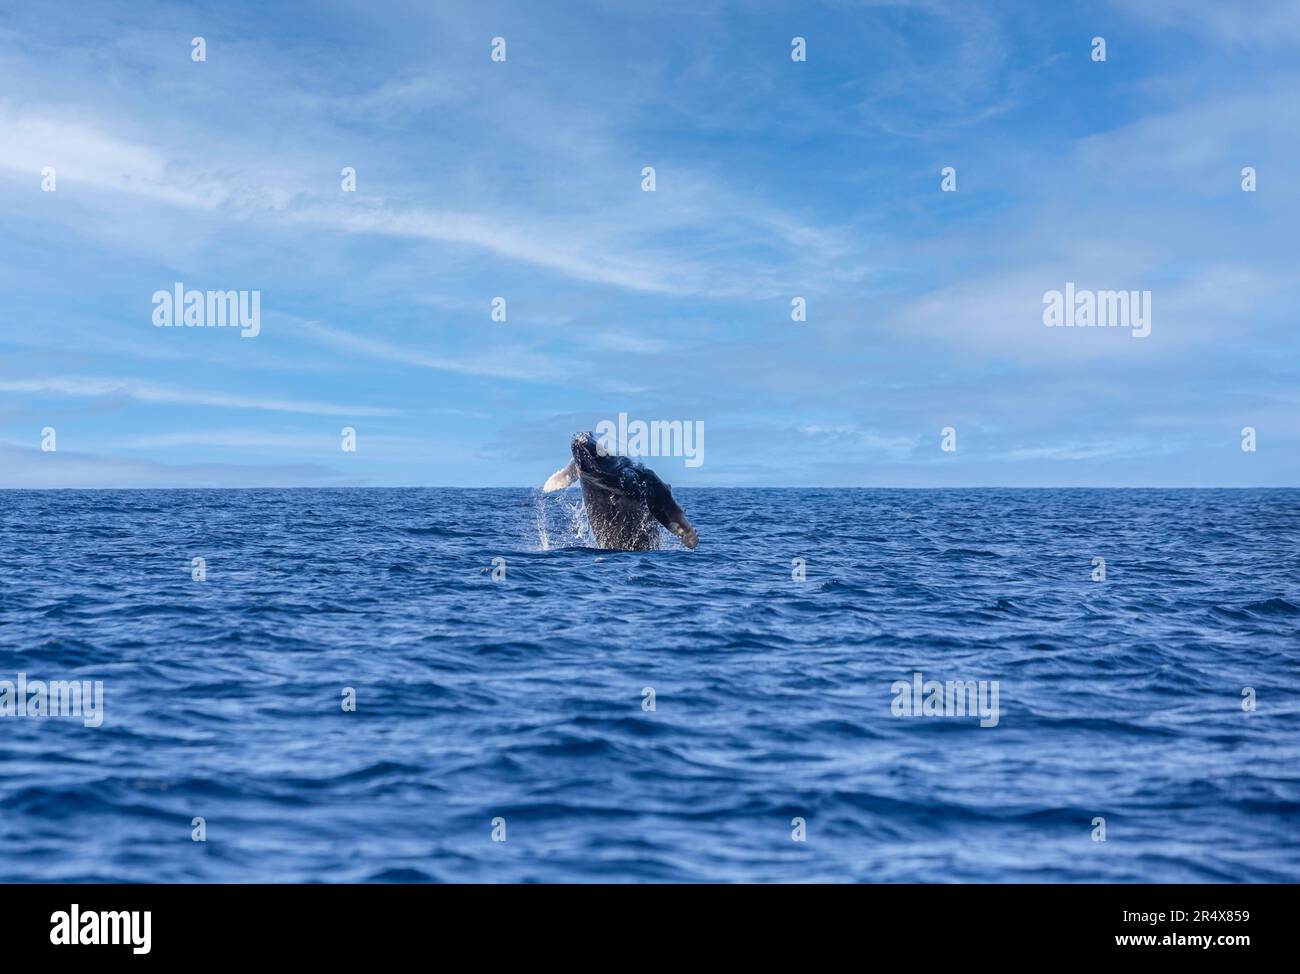 Baby Humpback Whale (Megaptera Novaeangliae) breaching out of the Pacific Ocean; Maui, Hawaii, United States of America Stock Photo